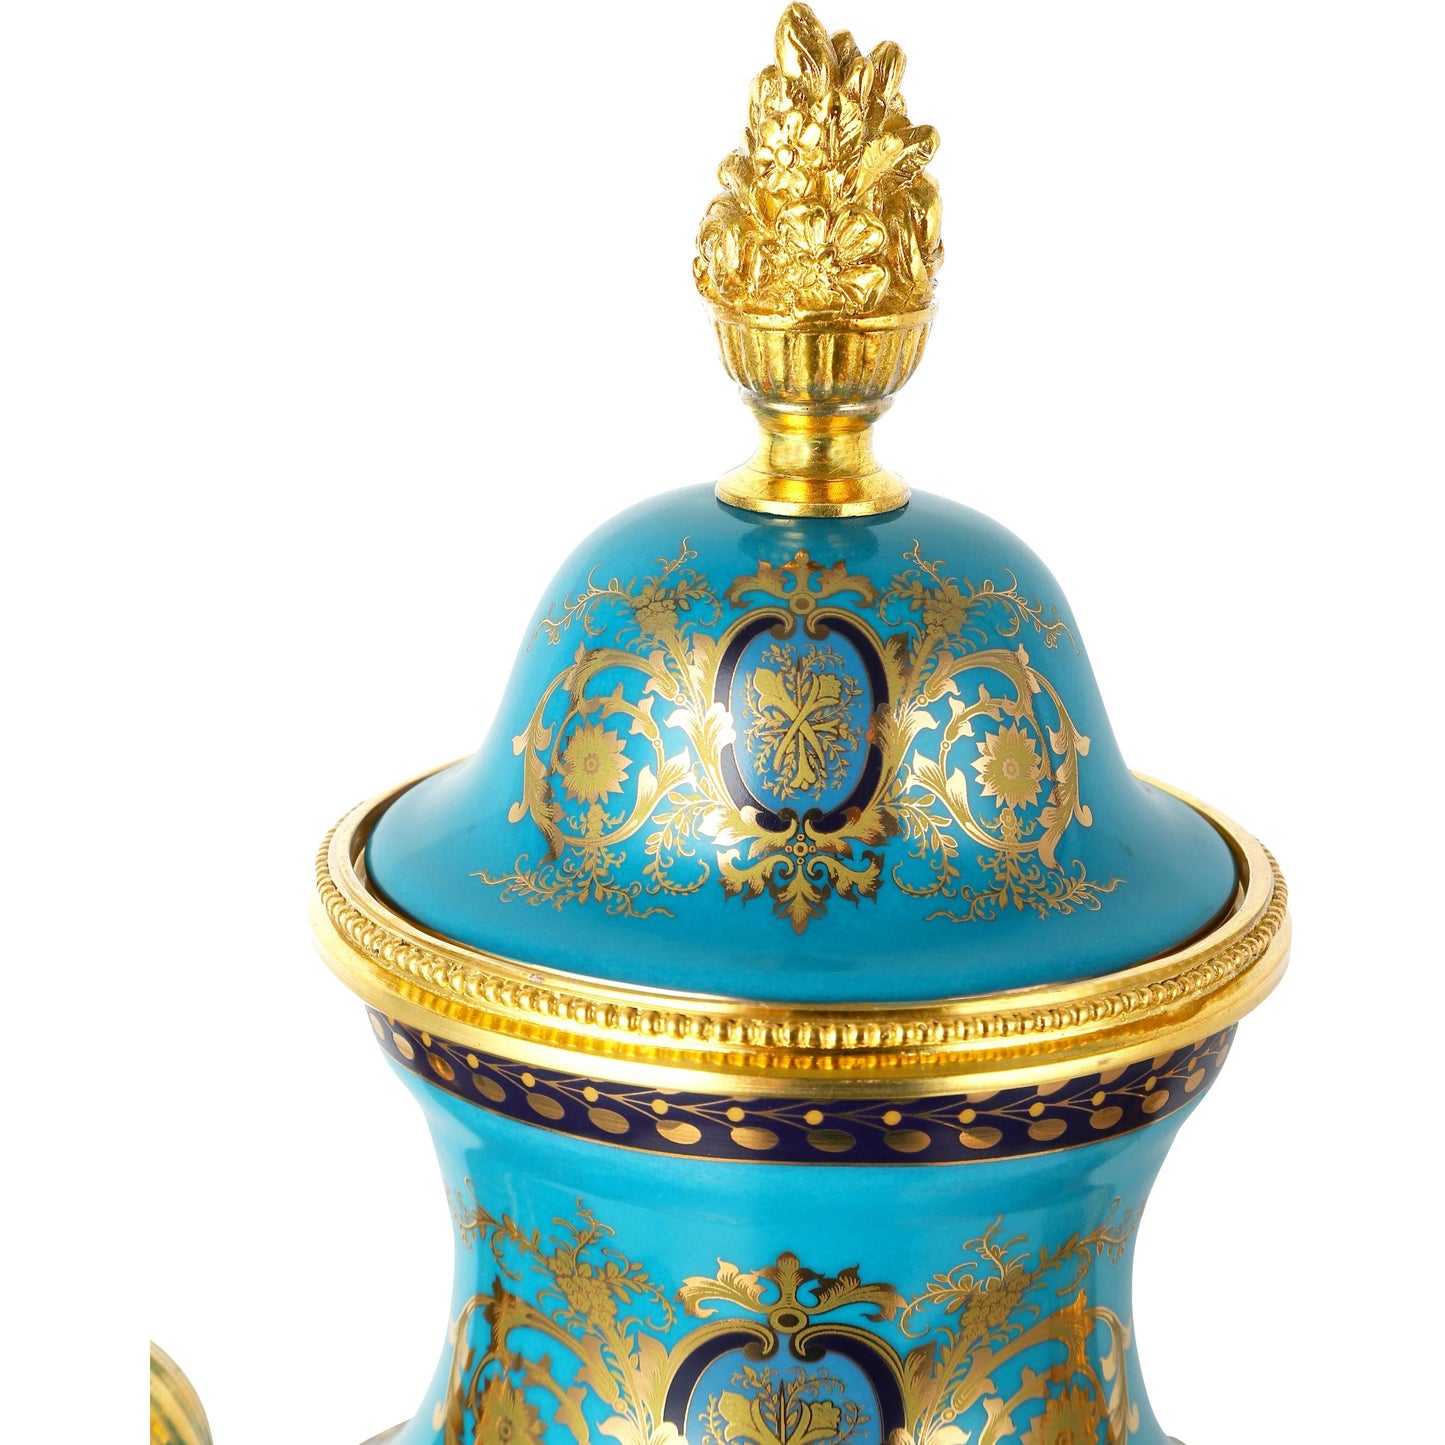 DECOELEVEN ™ Bronze and Porcelain Louis XV Style Jar with Cherub Handles